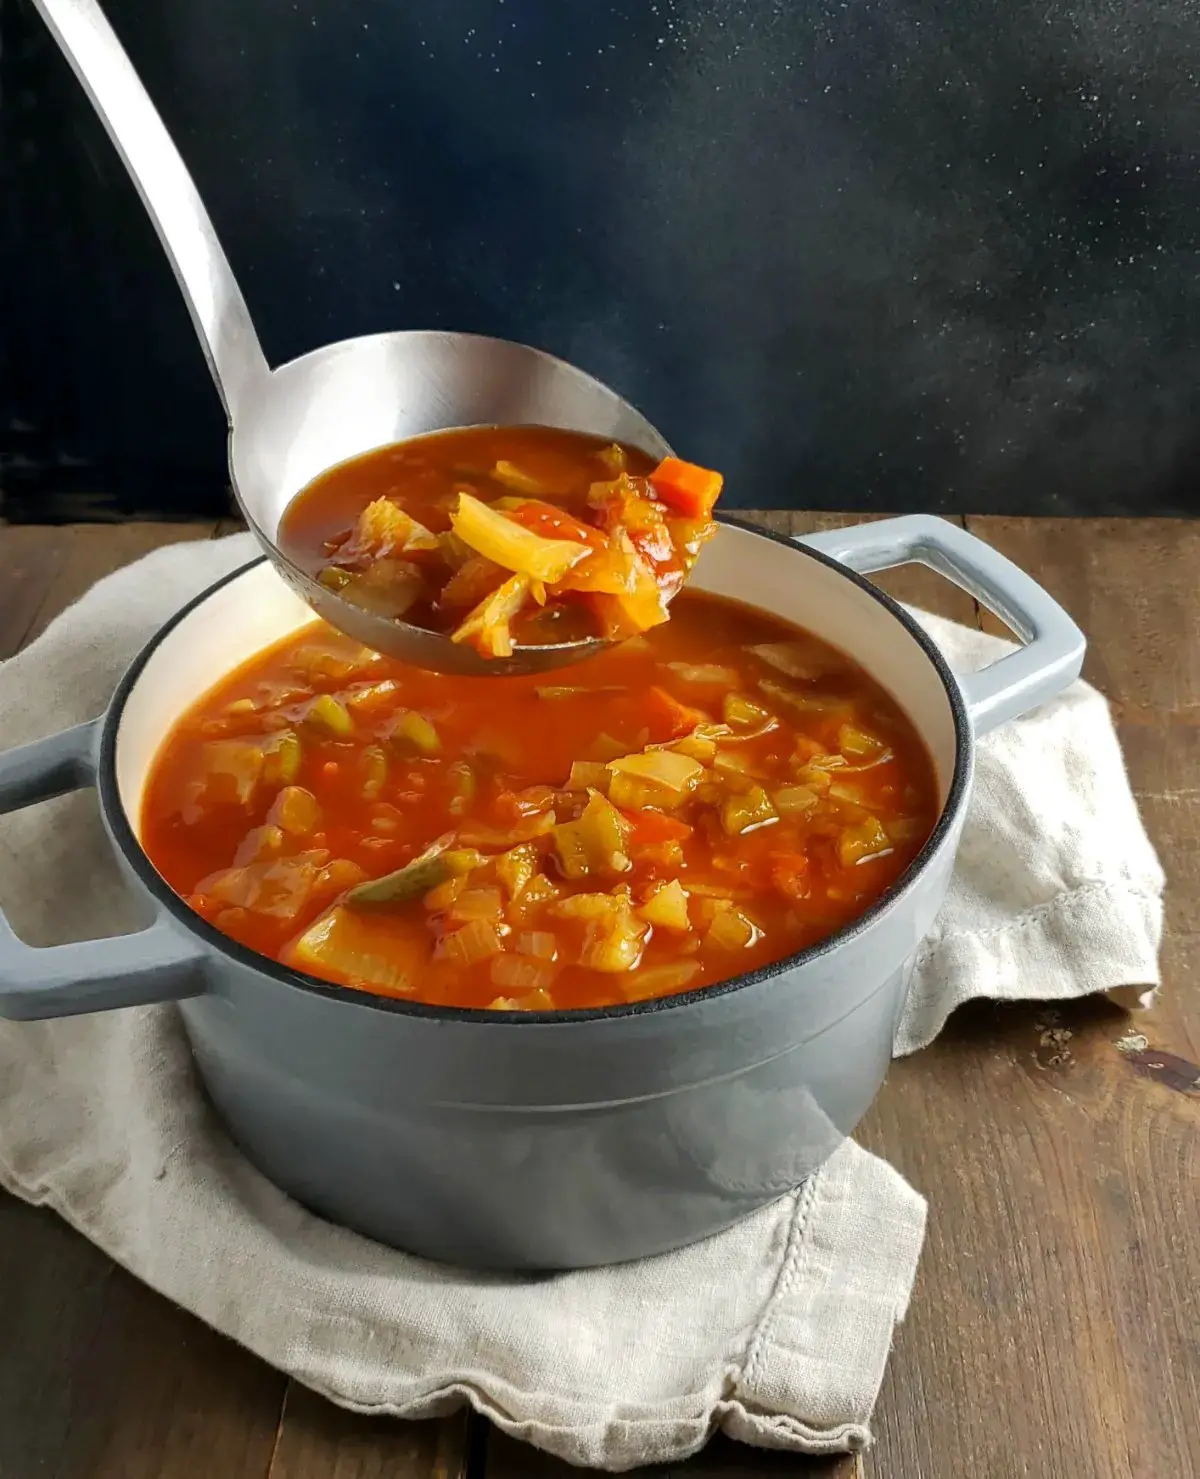 The Original Fat Burning Cabbage Soup